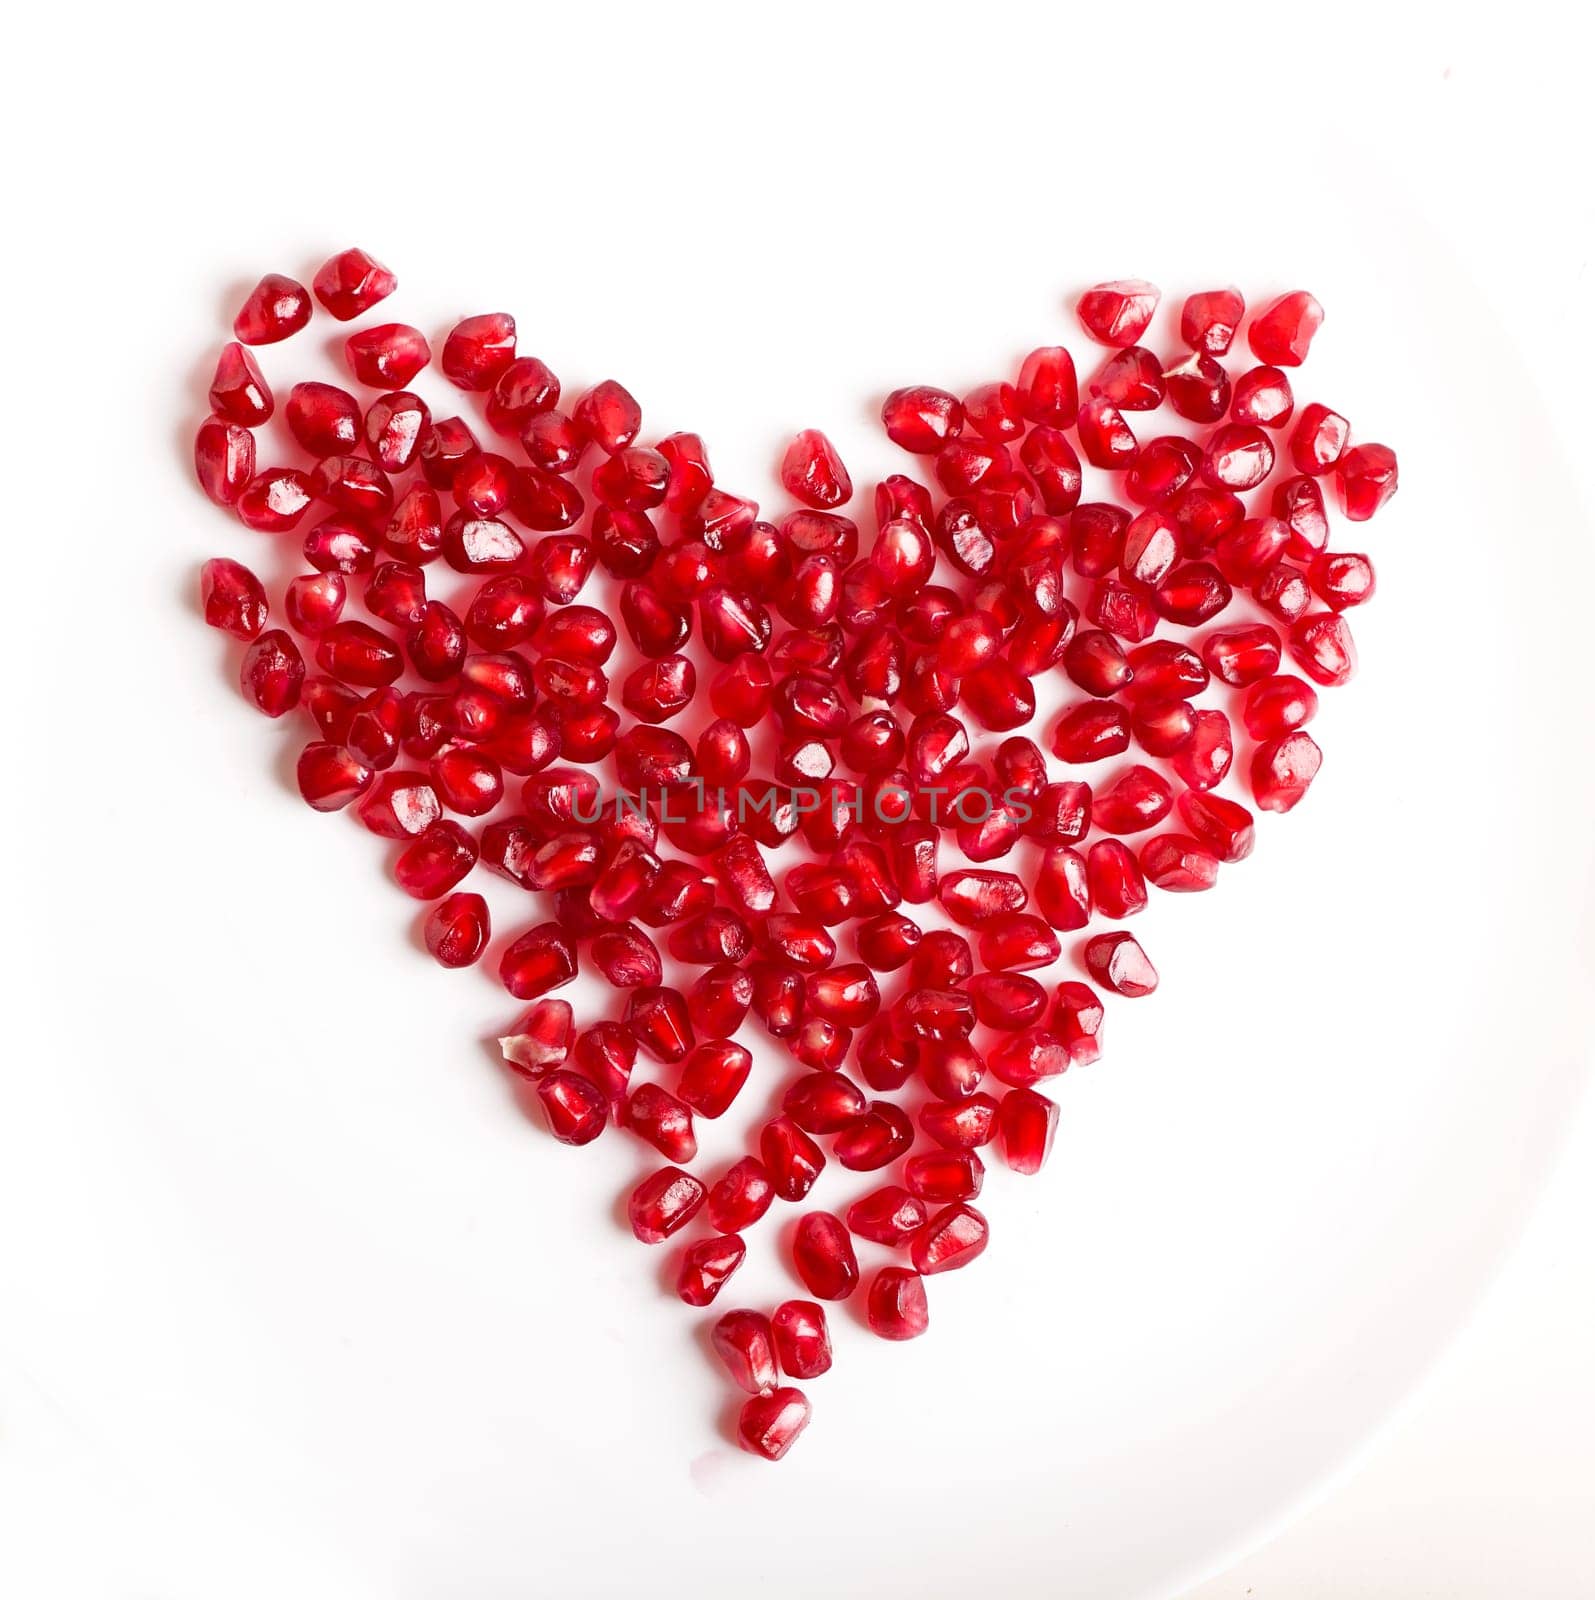 pomegranate seeds in the form of a heart on a white background